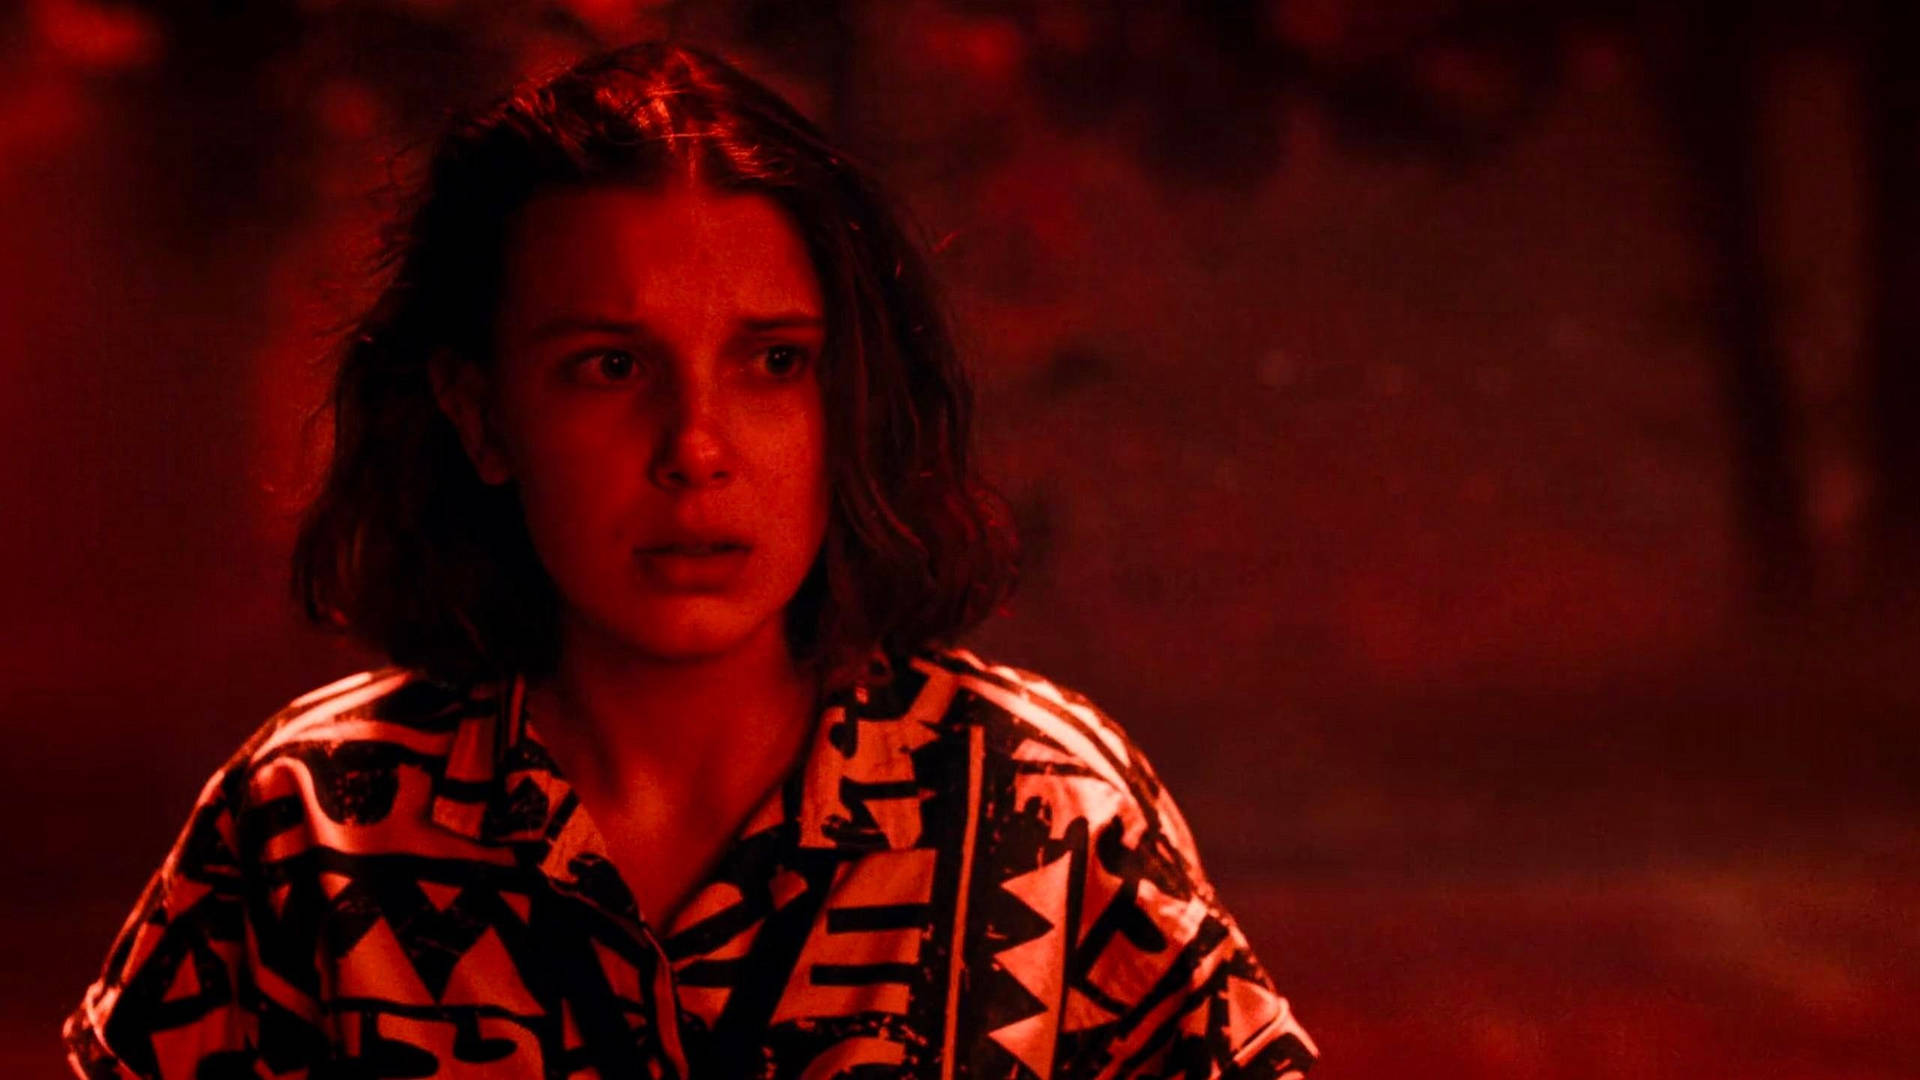 Download Eleven From Stranger Things In Red Filter Wallpaper